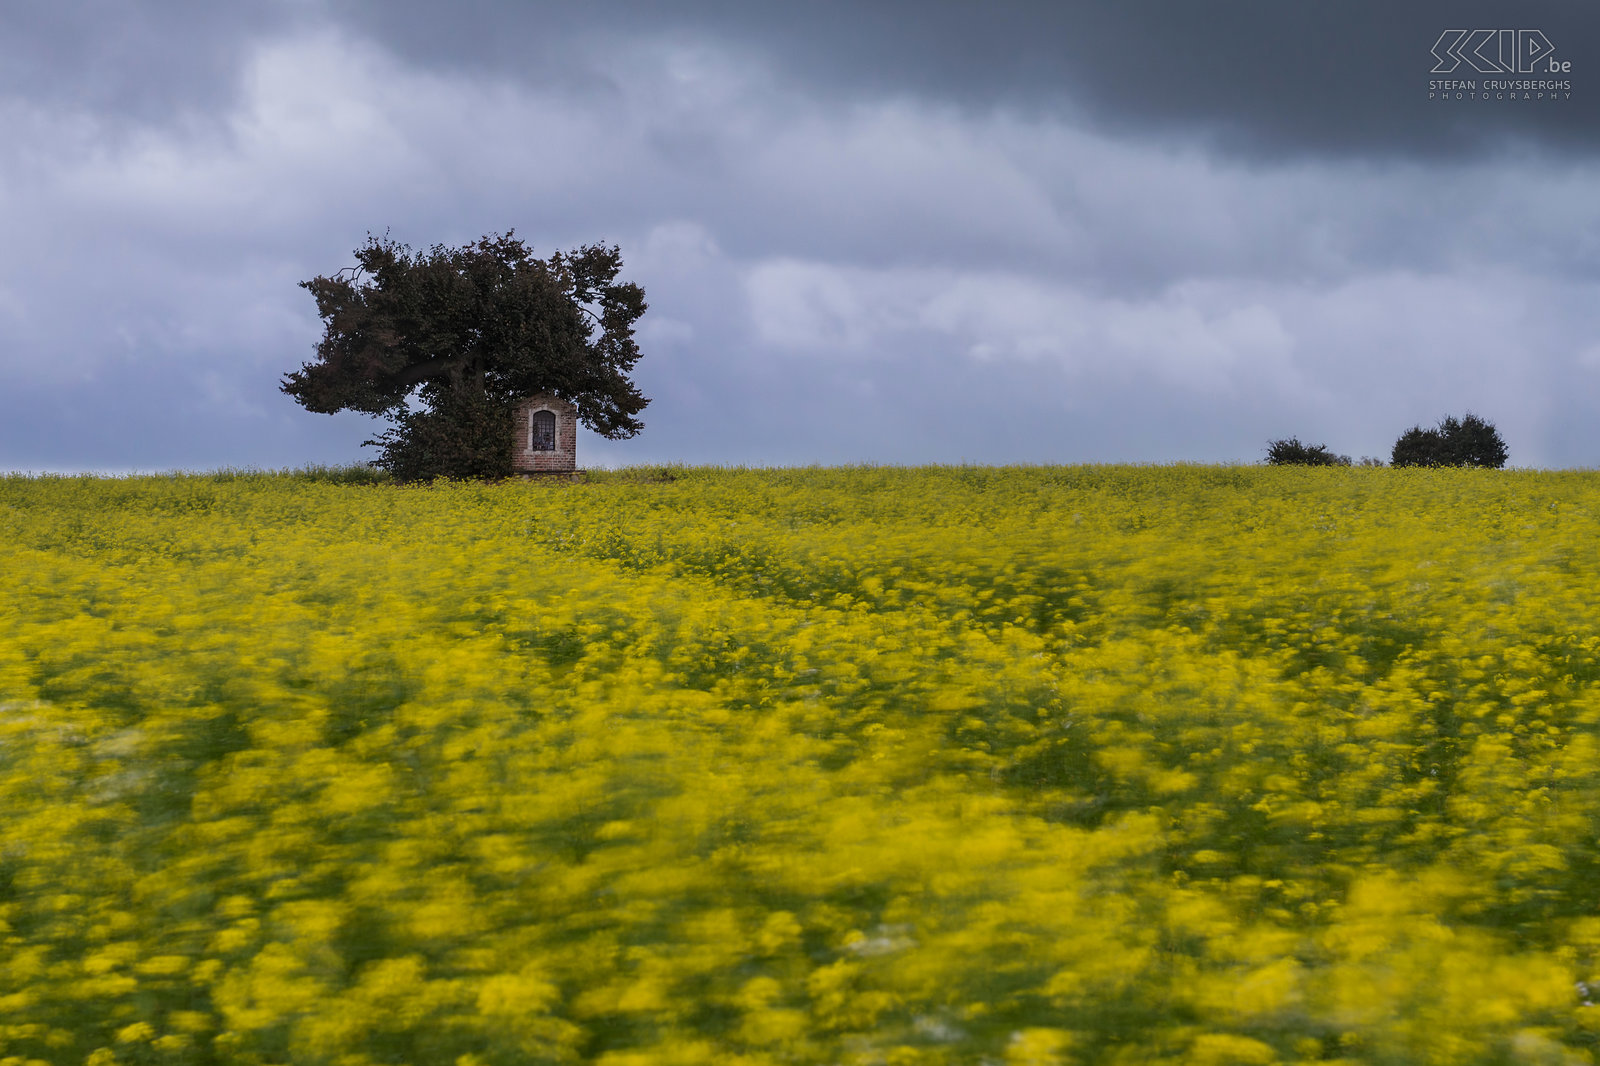 Sint-Pieters-Rode - Chapel with rapeseed and looming clouds Looming clouds and the blooming rapeseed field at the small Saint Joseph's chapel in Sint-Pieters-Rode. Stefan Cruysberghs